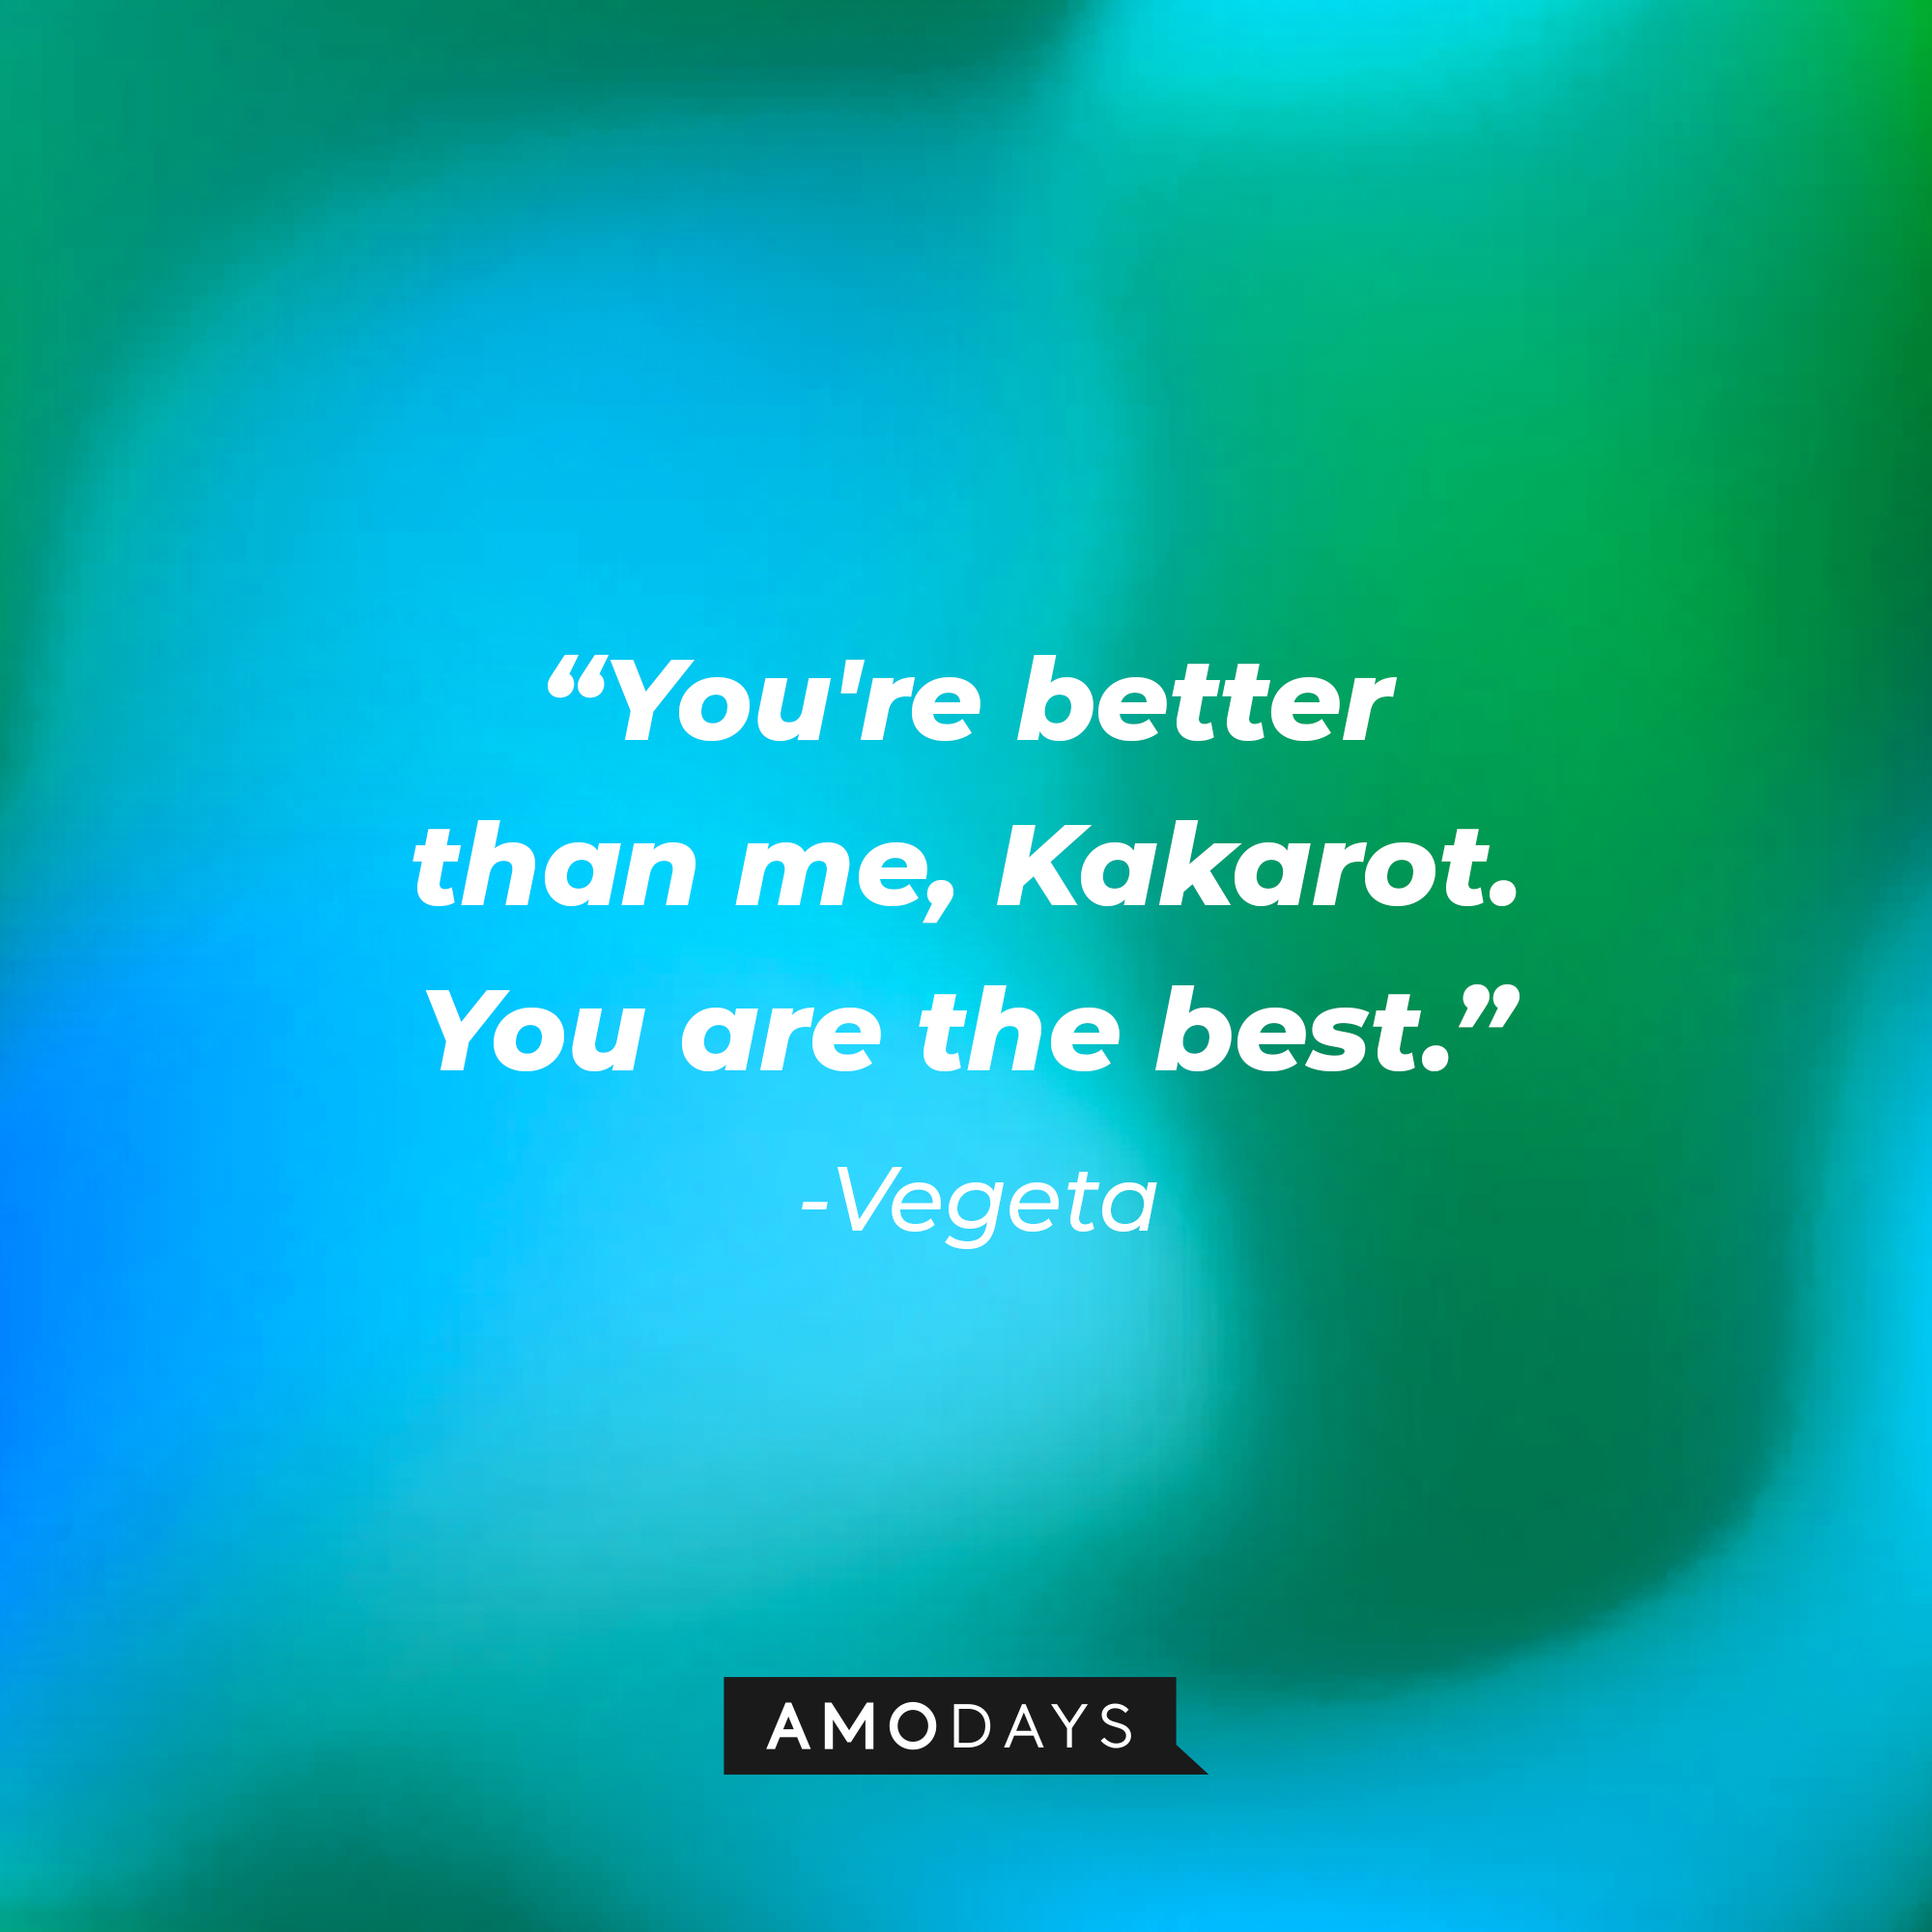 Vegeta’s quote: "You're better than me, Kakarot. You are the best."  | Source: AmoDays